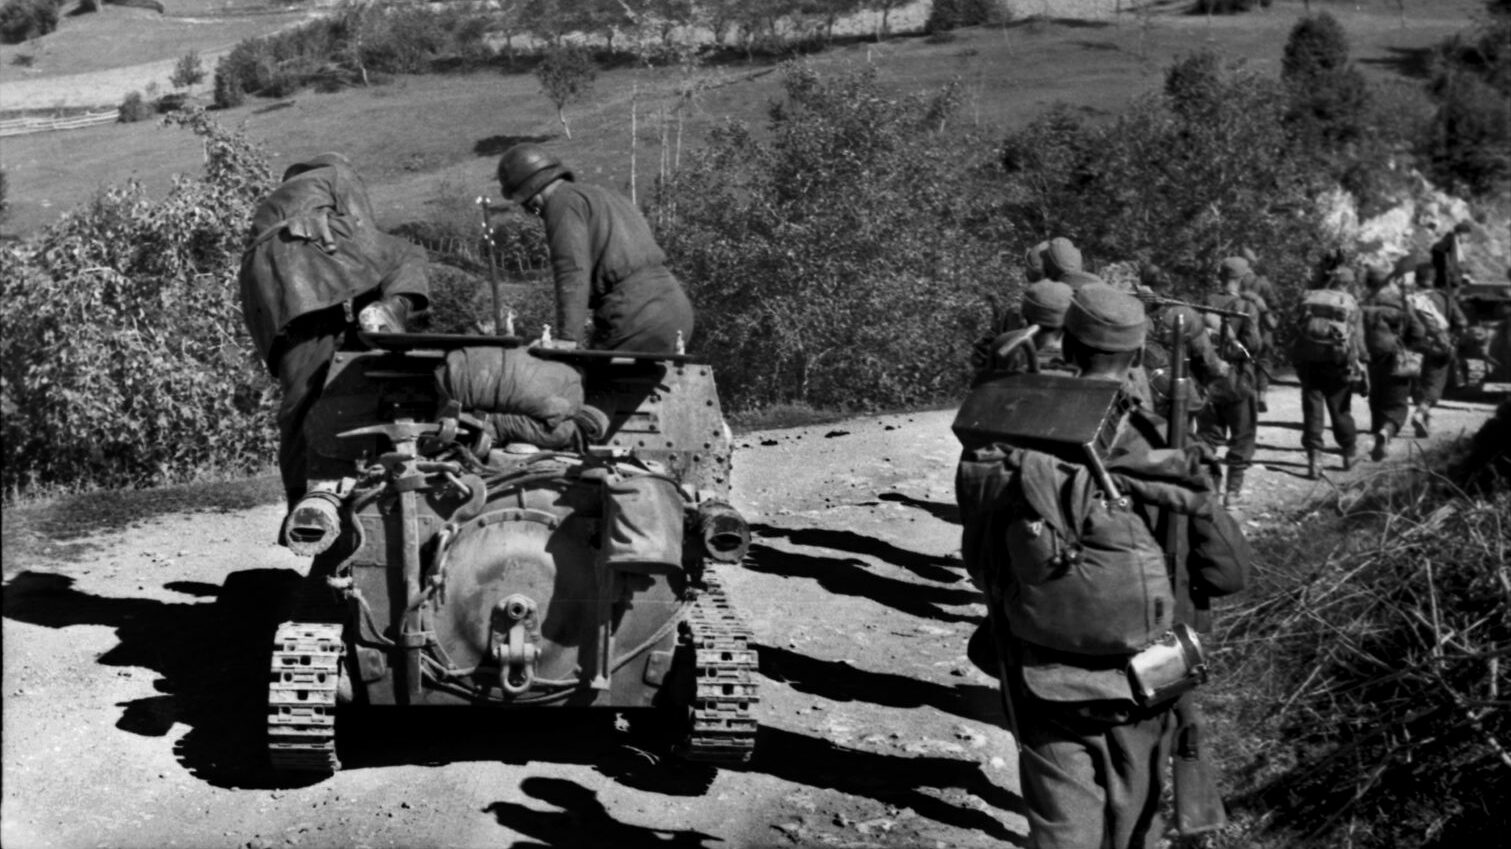 Accompanied by an Italian military vehicle, German mountain troops advance along a dirt road in Albania in 1943.